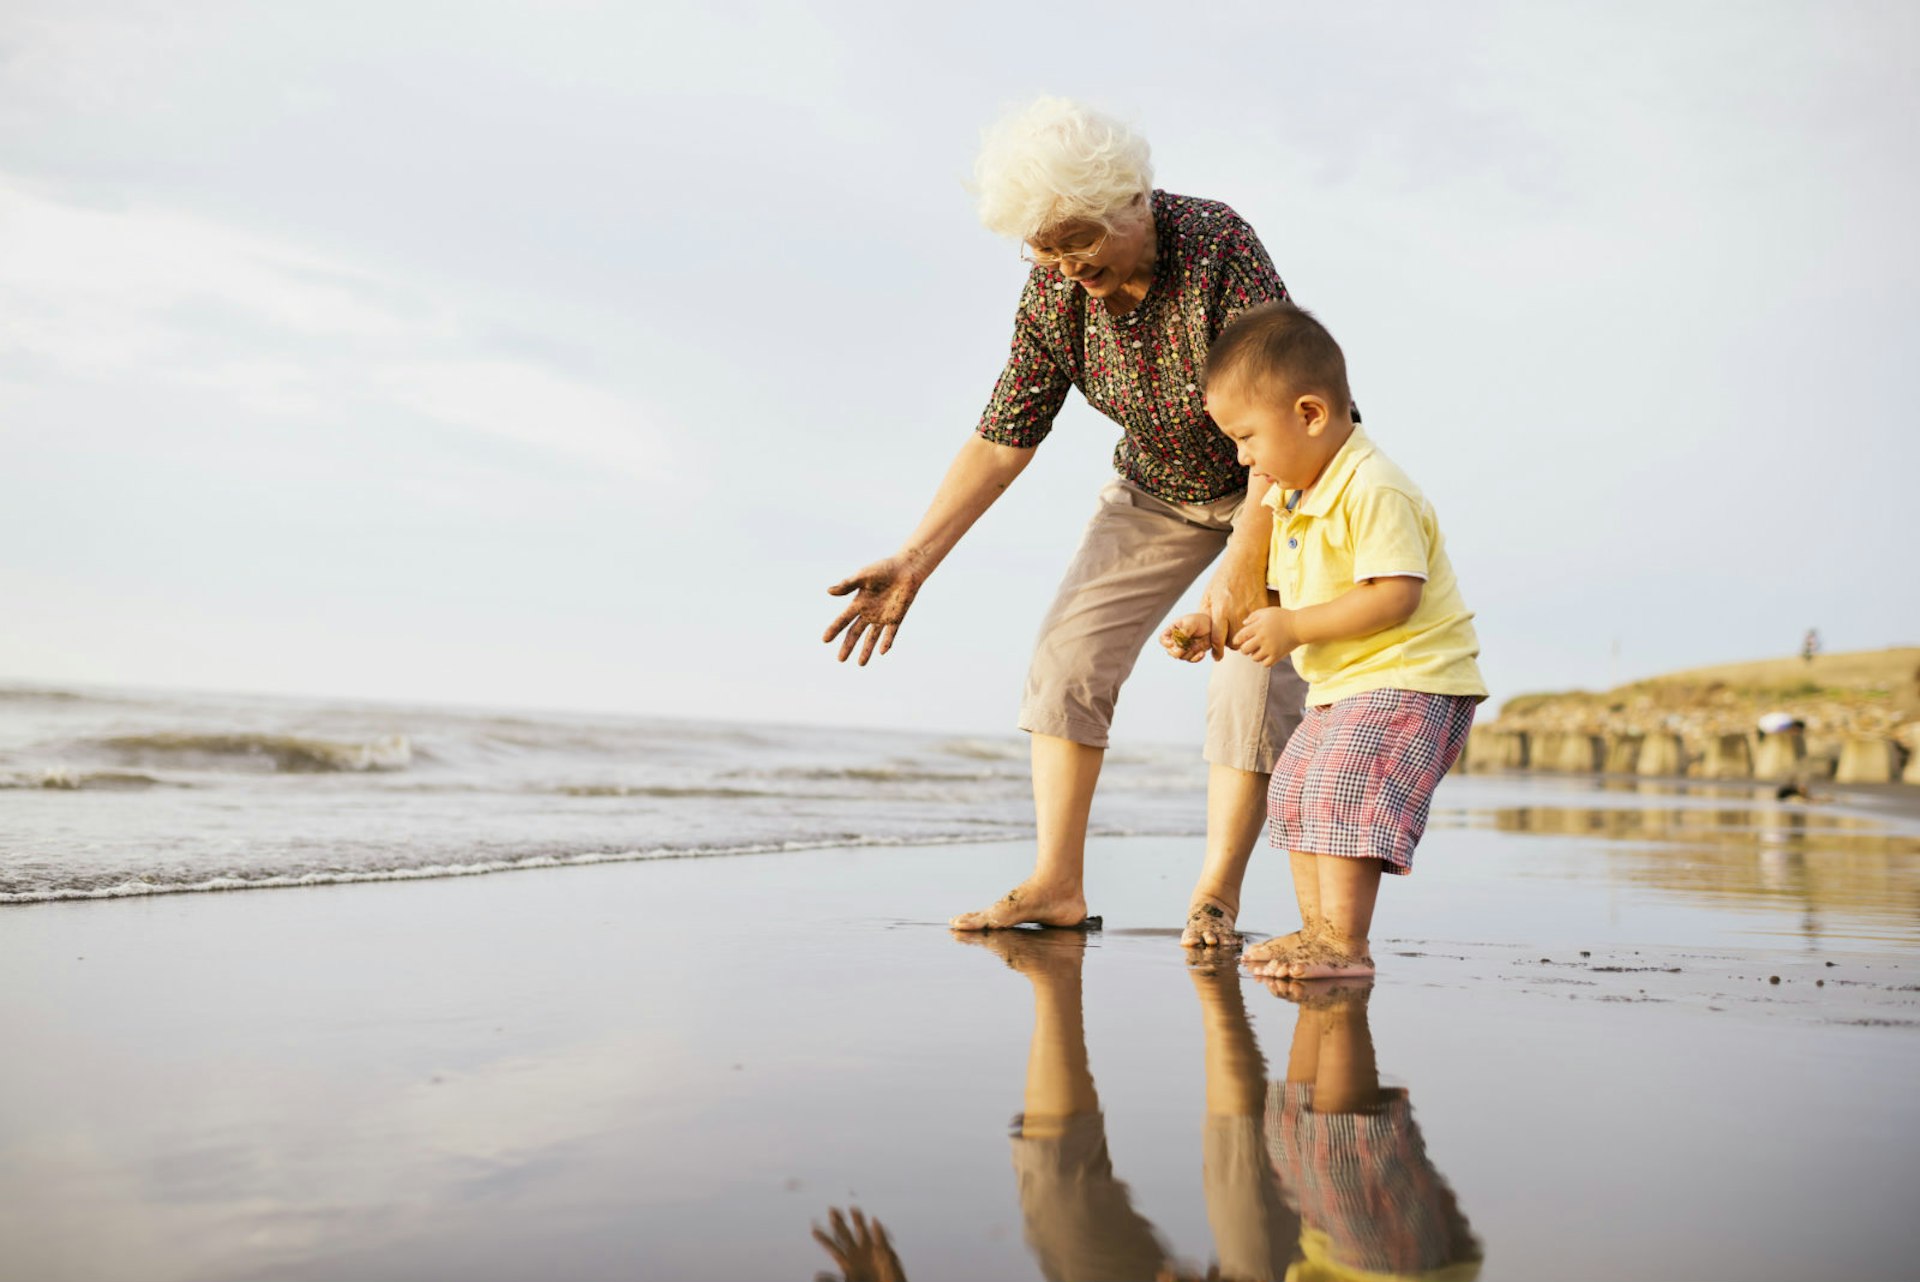 Romantic trip with kids in tow – A grandmother and grandson play on the beach.